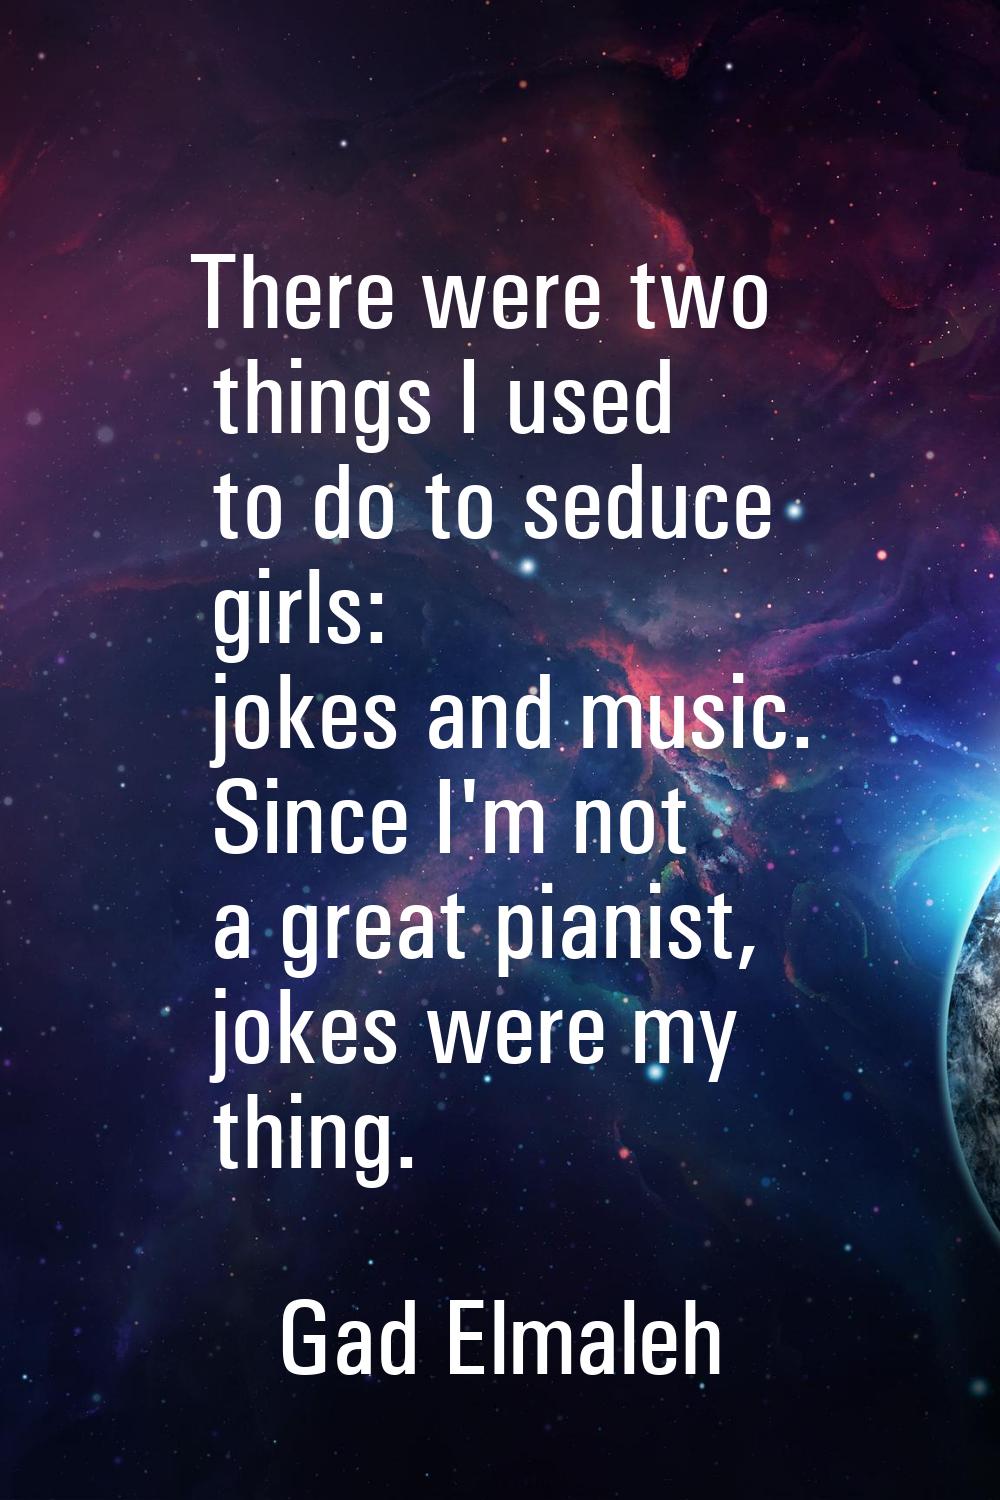 There were two things I used to do to seduce girls: jokes and music. Since I'm not a great pianist,